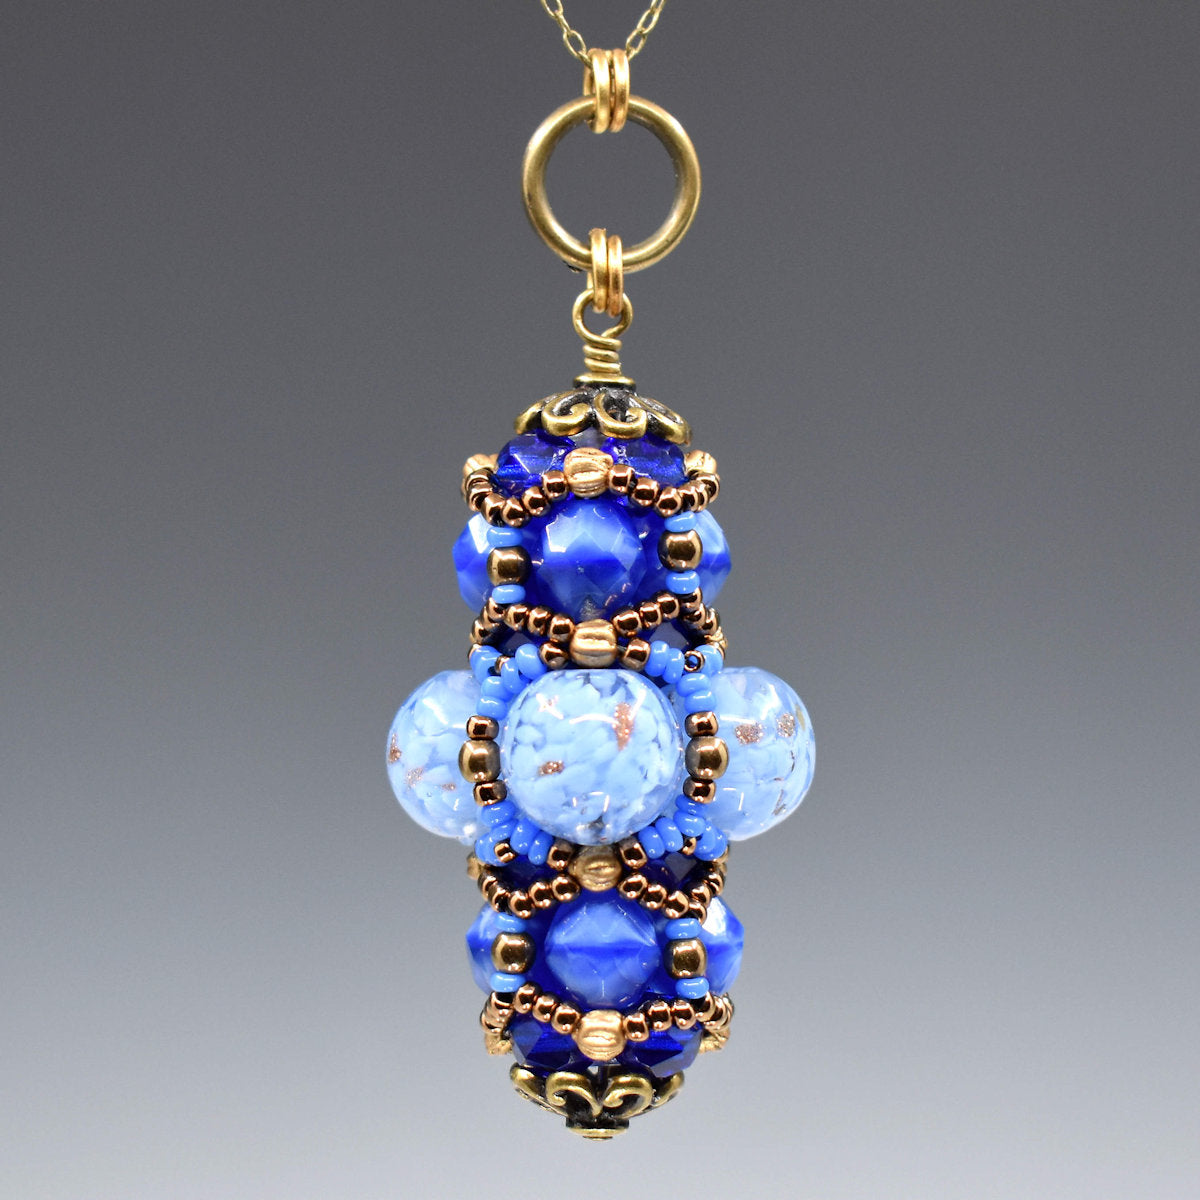 A blue and gold pendant hanging from a gold colored chain against a gray background. The middle of the pendant has clear beads filled with flecks of light blue and some gold glitter accents. The top and bottom layers are made from smaller medium blue beads. The whole pendant is overlaid with gold and blue seed beads. 